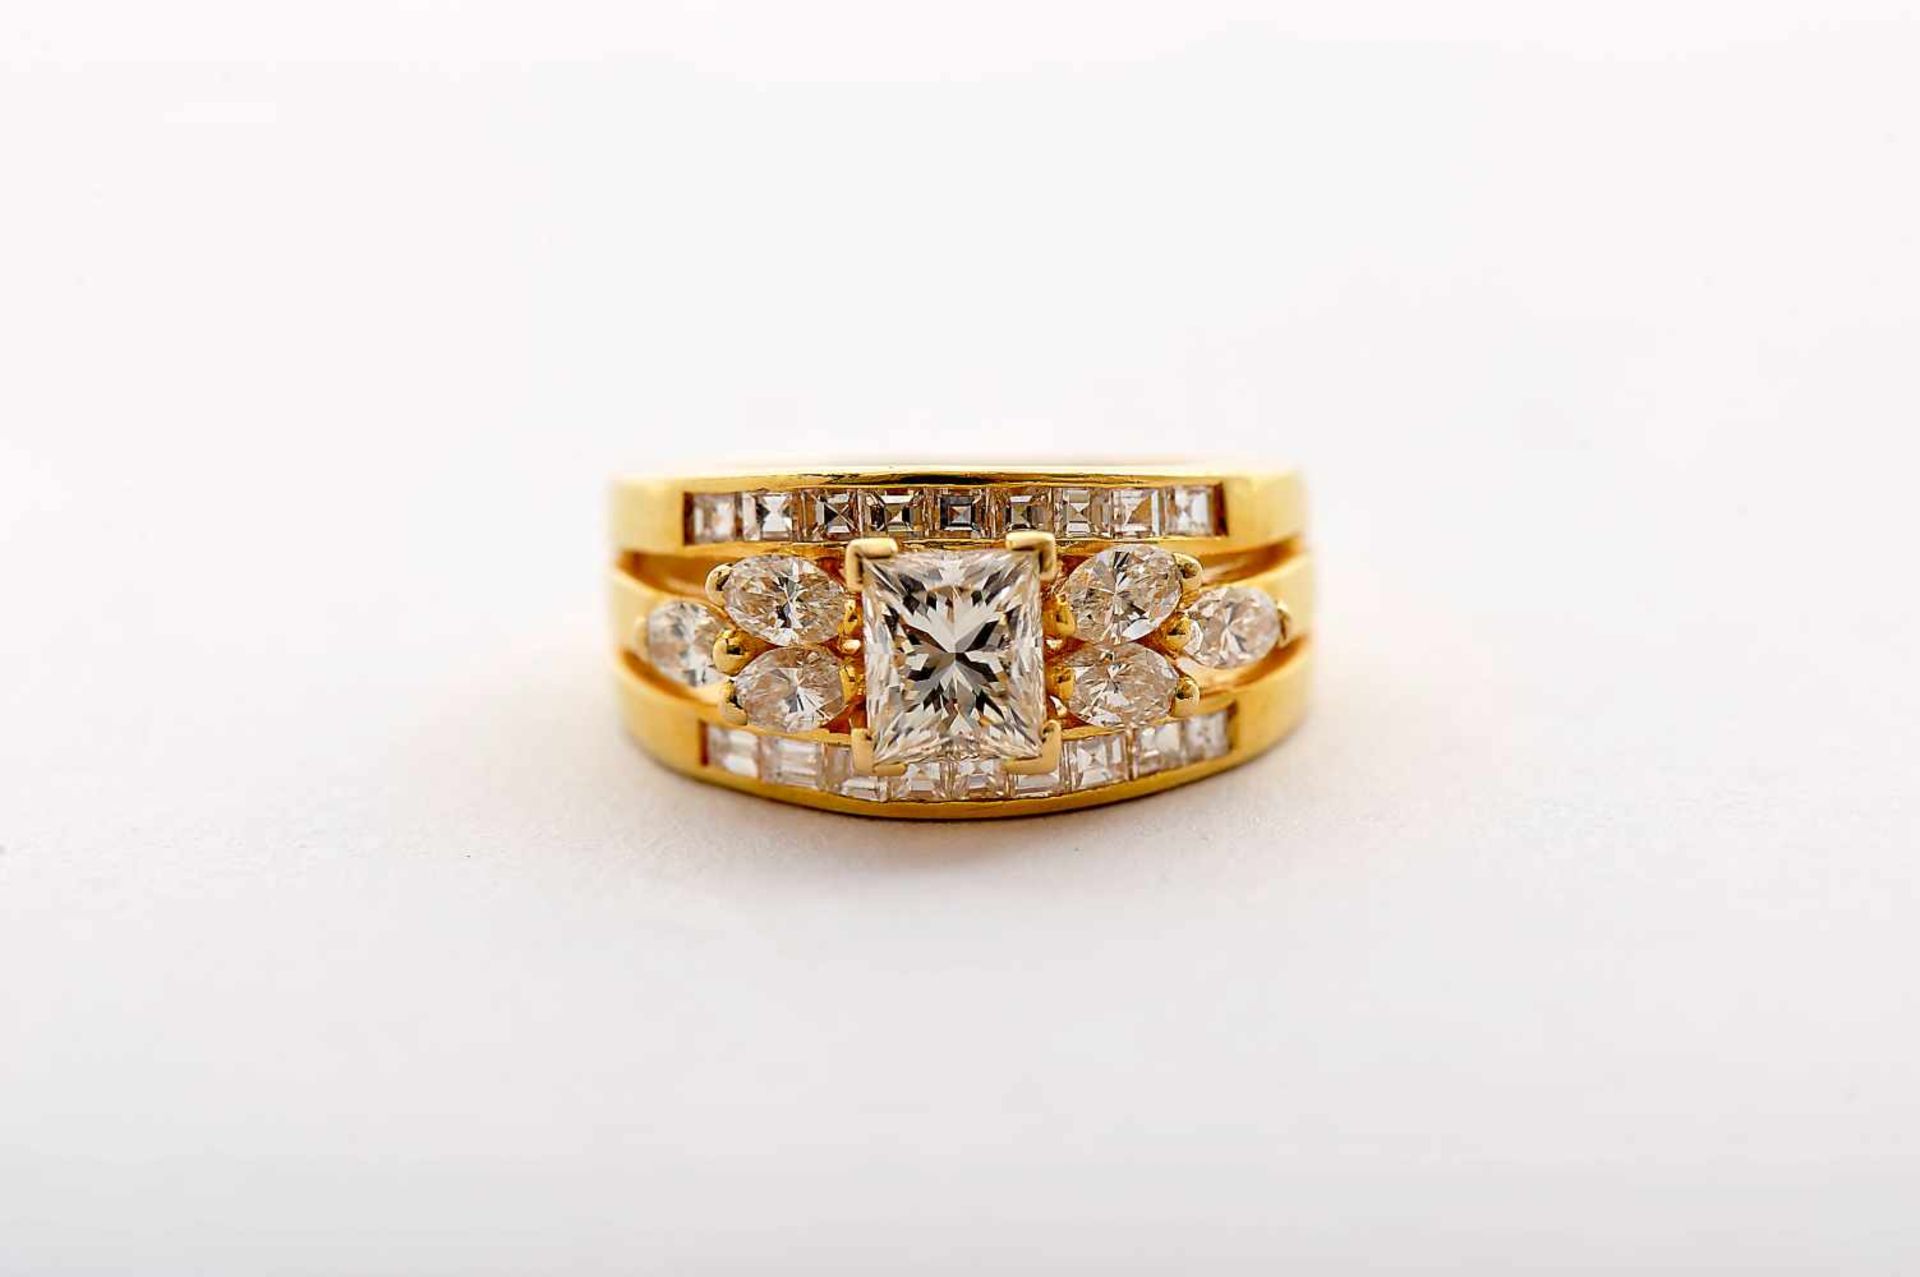 A Ring, 800/1000 gold, set with 6 navette cut diamonds with an approximate weight of 0.60 ct., 18